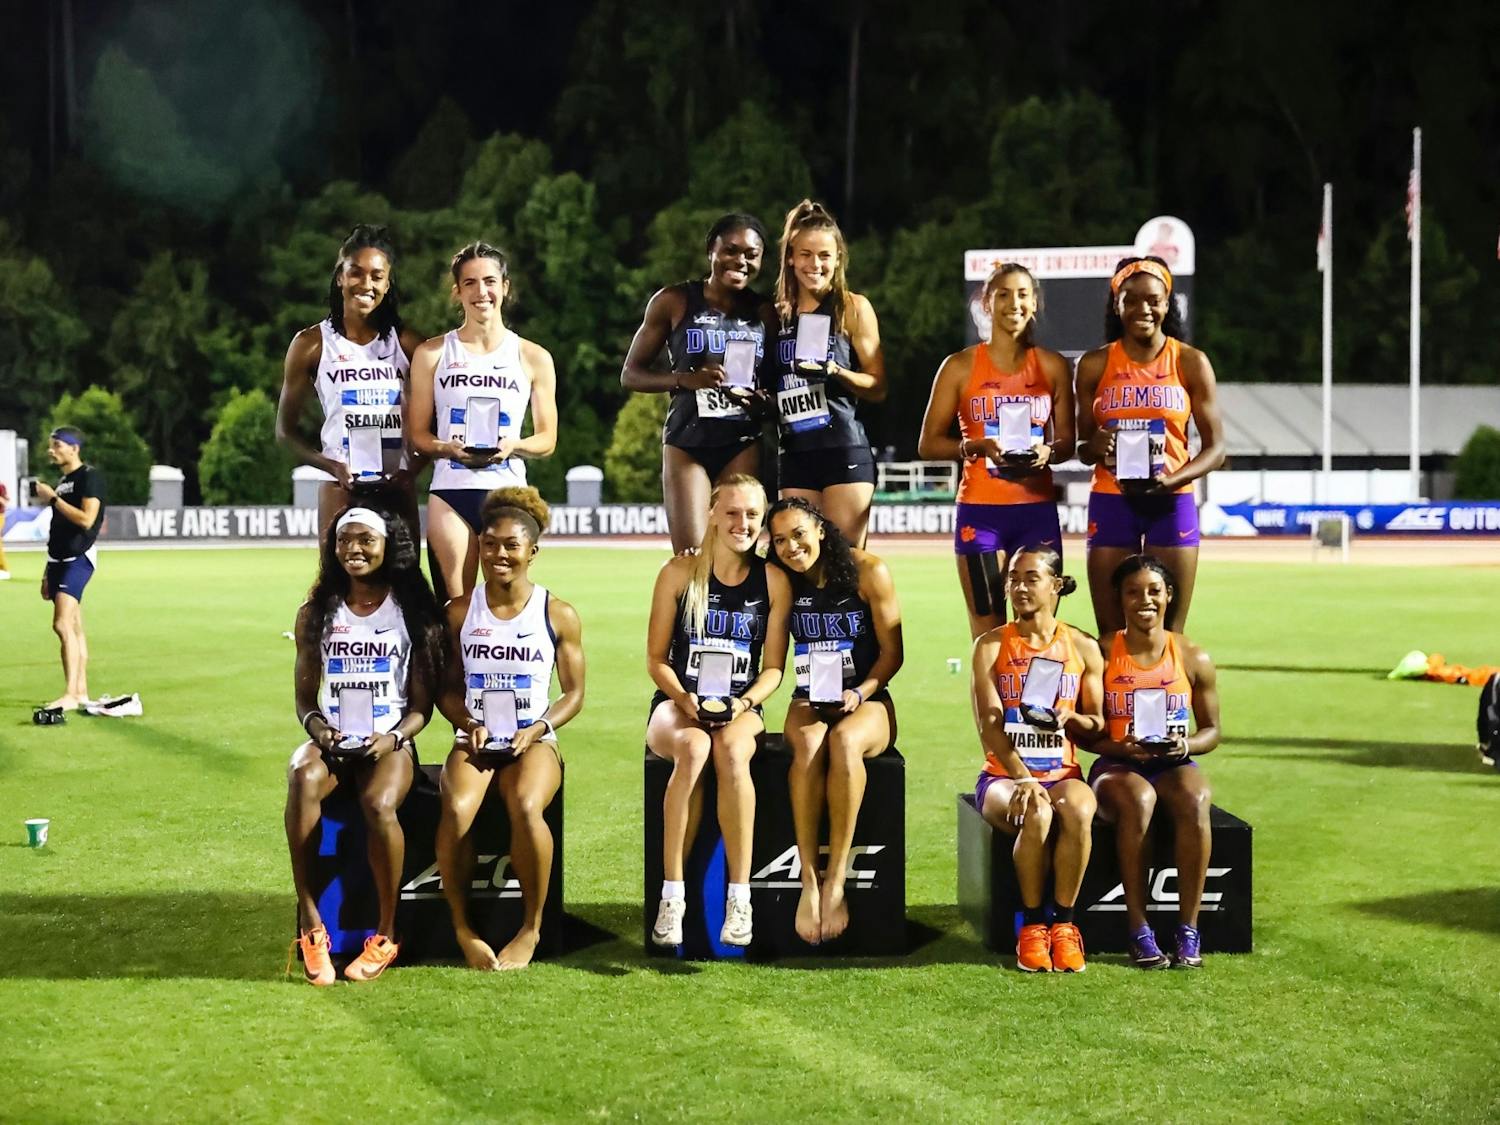 The women's 4x400 relay team took home gold Saturday.